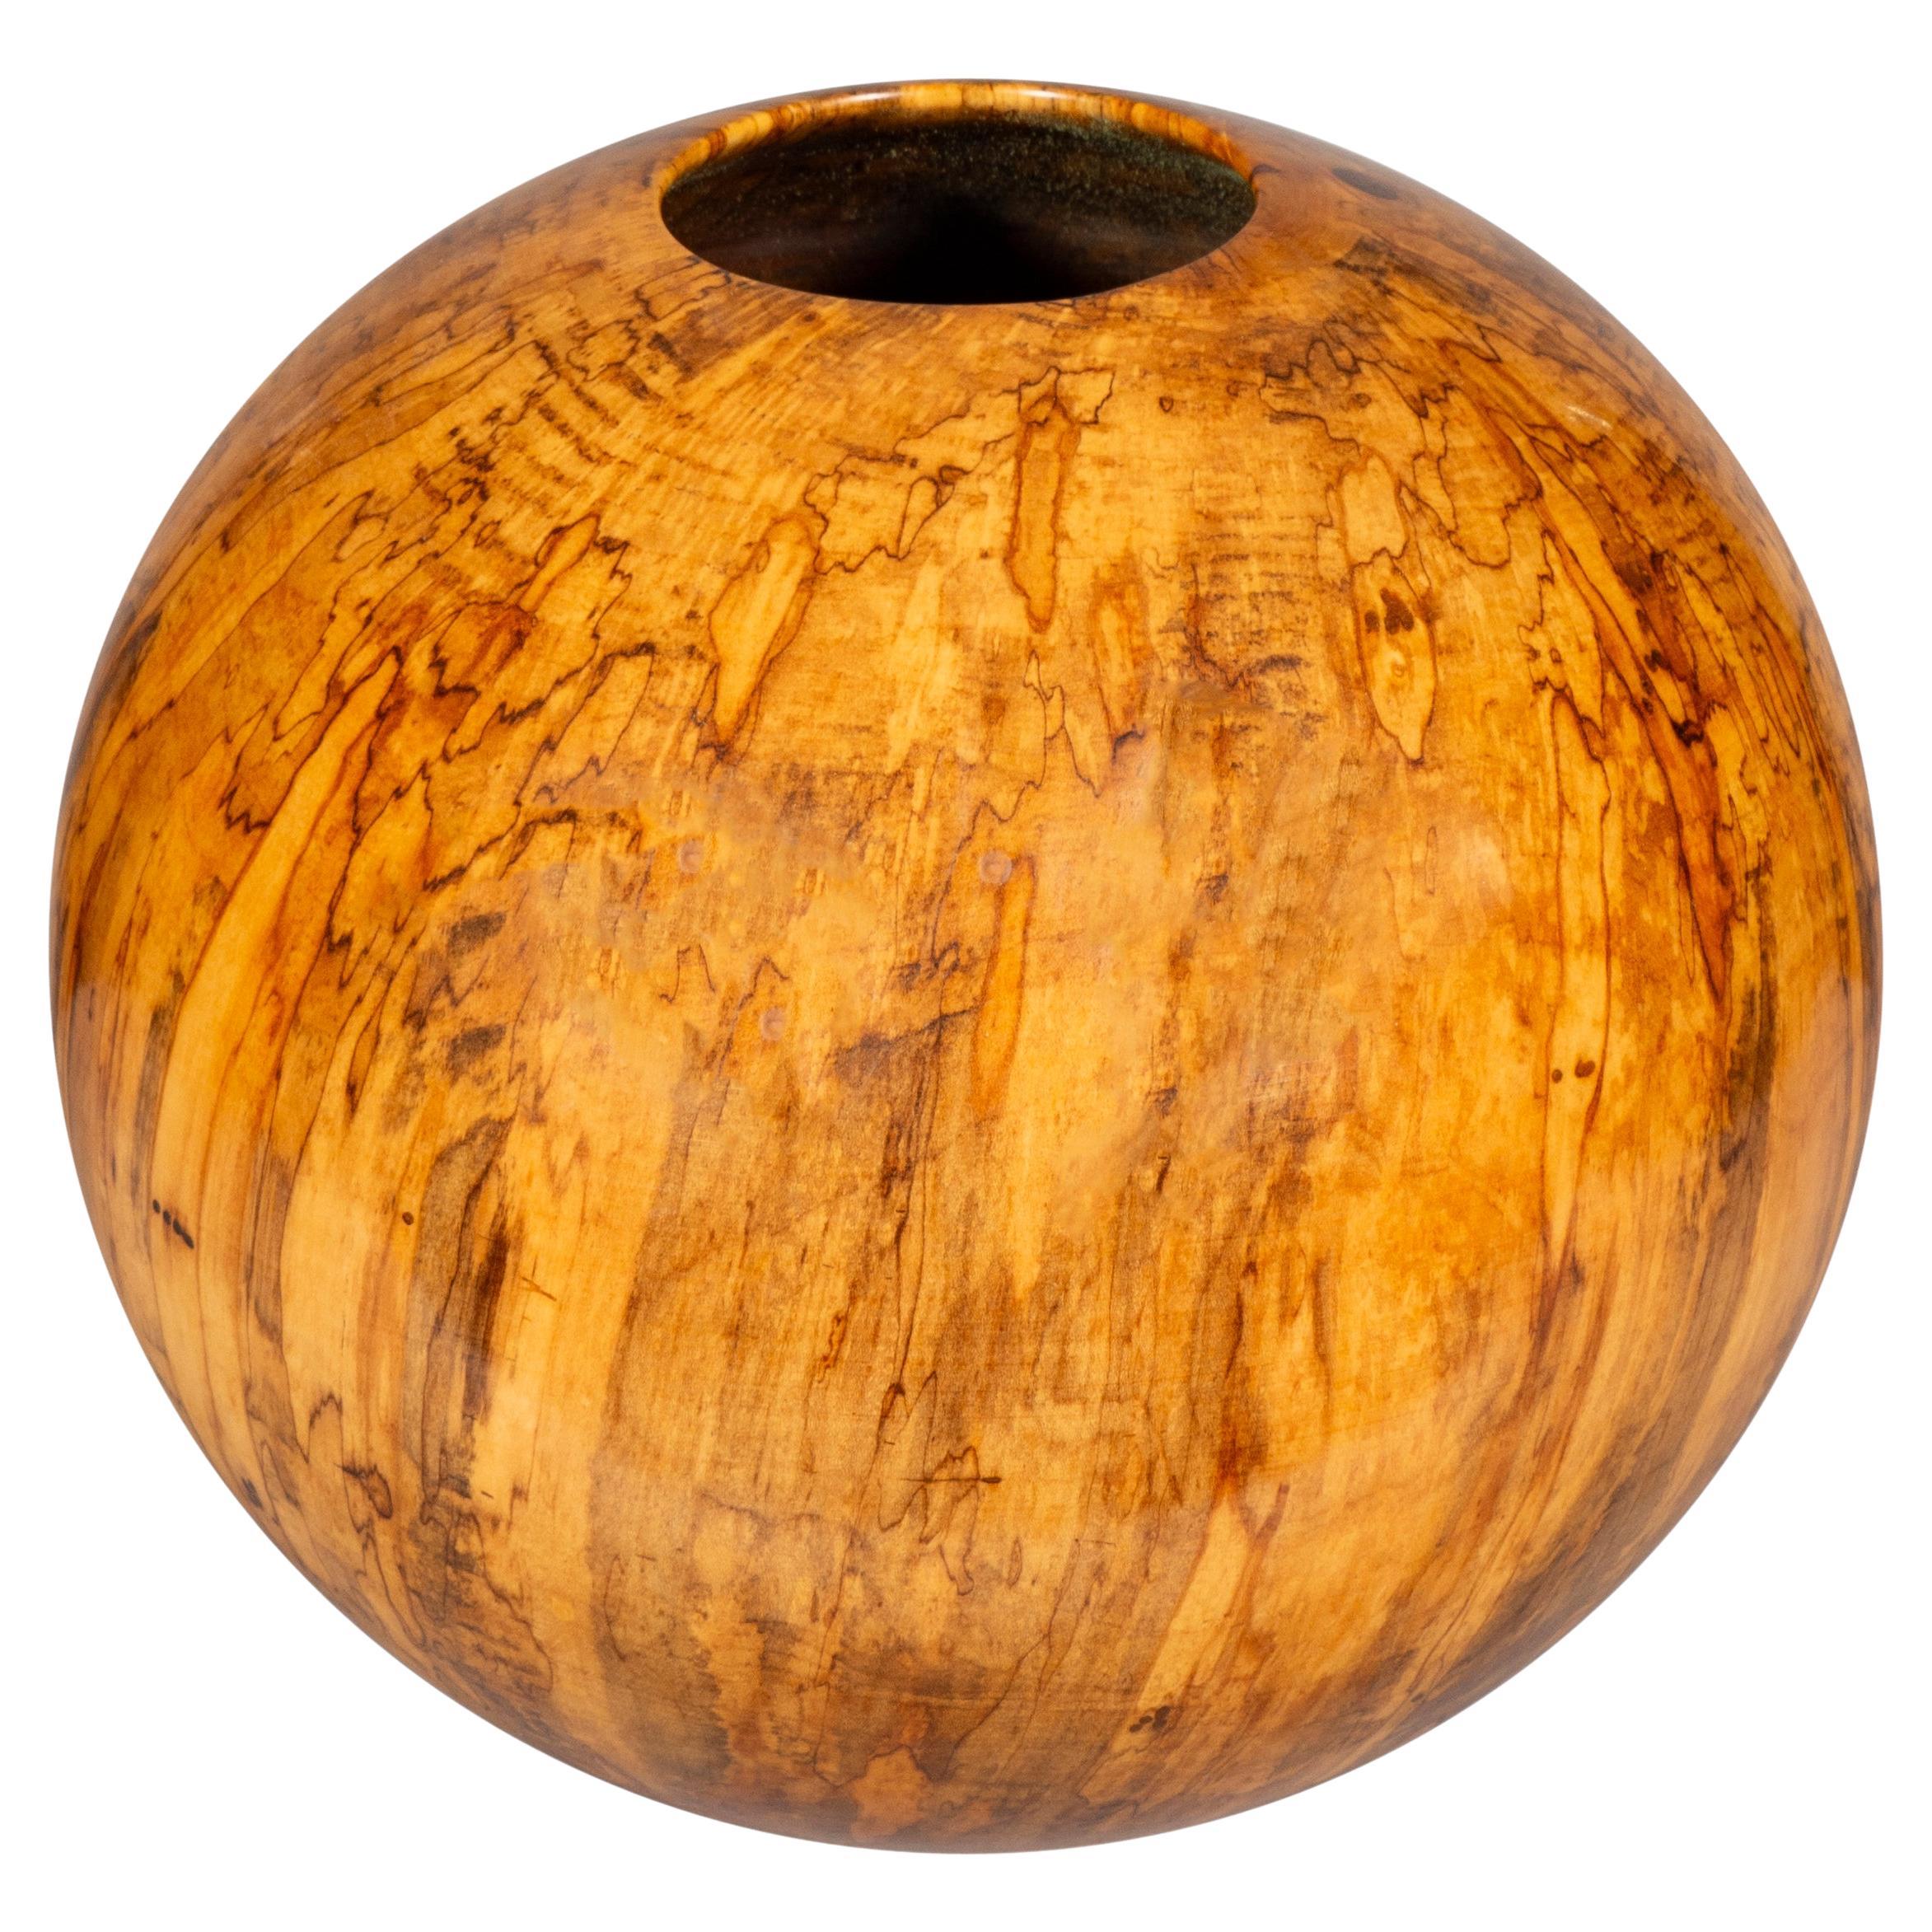 Philip Moulthrop Spalted Silver Maple Vase